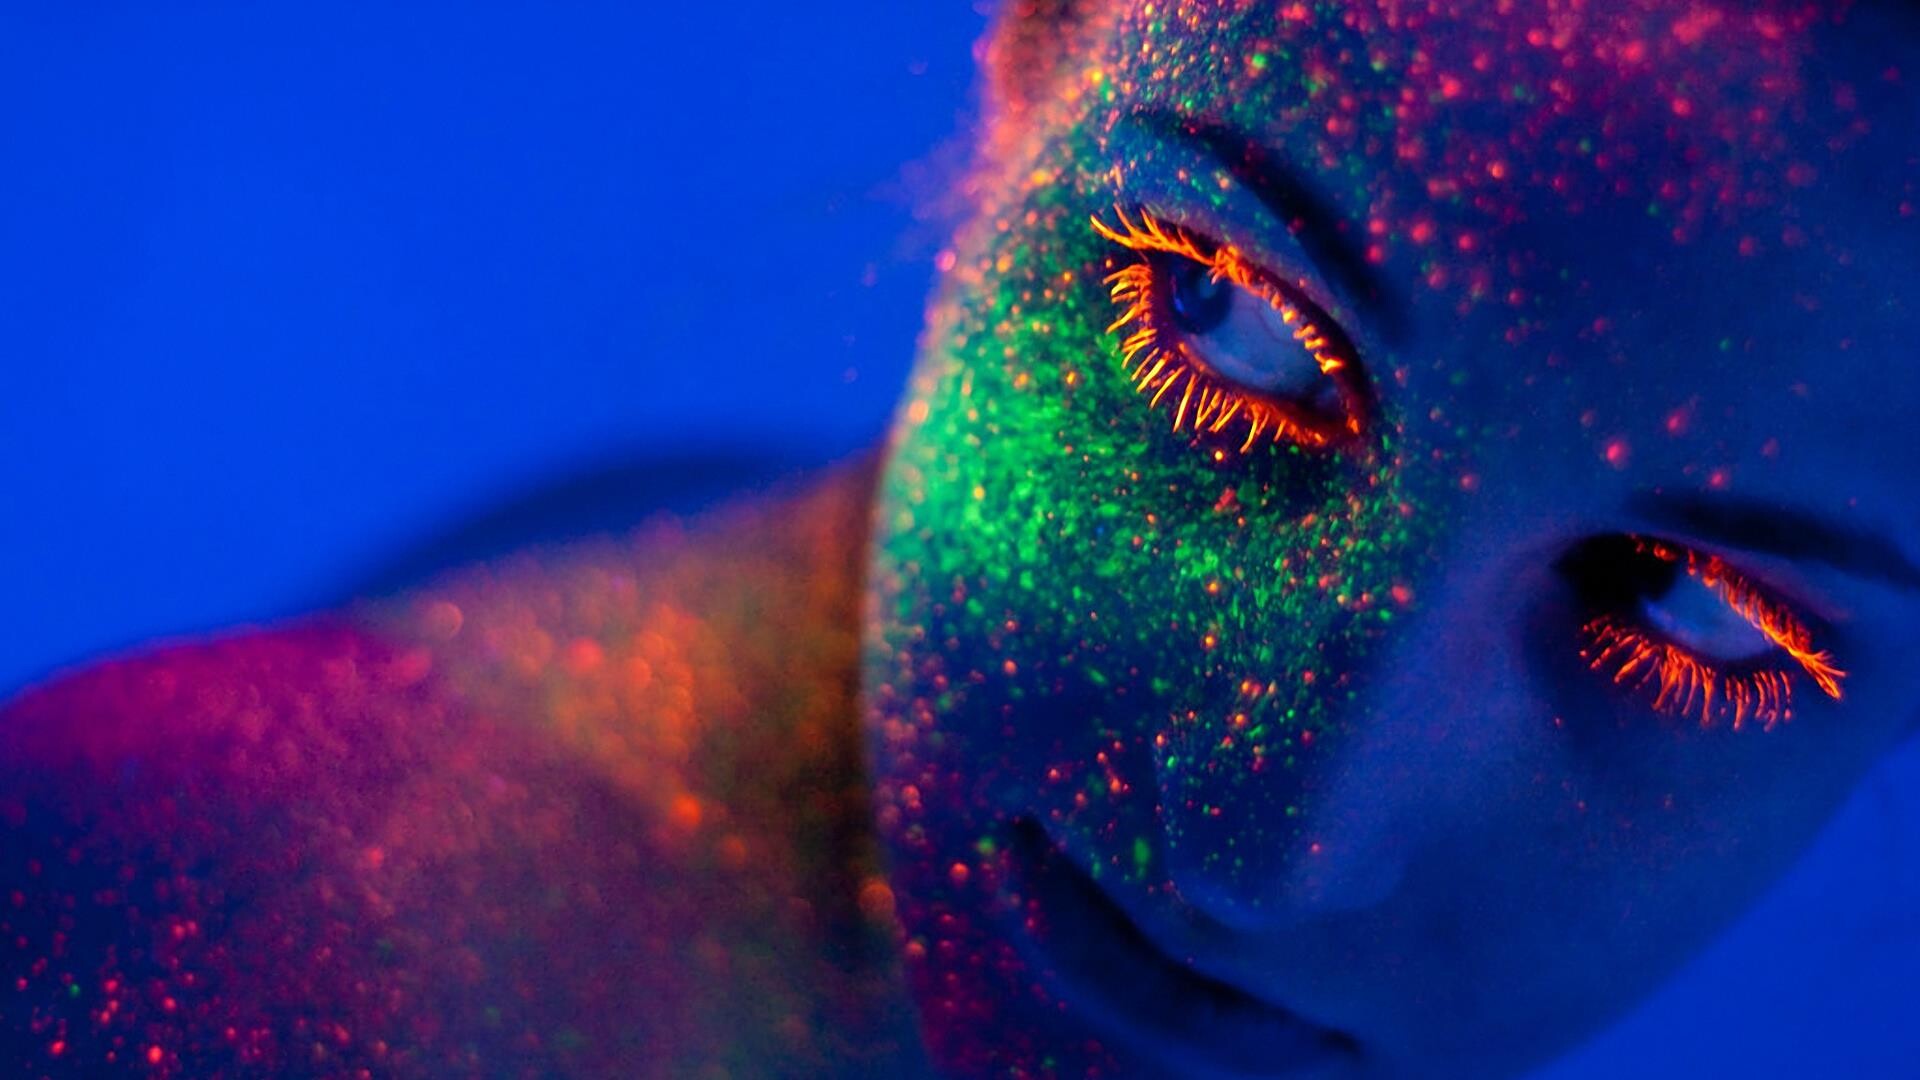 Glow in the Dark: Fluorescent face, Neon lights, Glowing makeup, Body art. 1920x1080 Full HD Background.